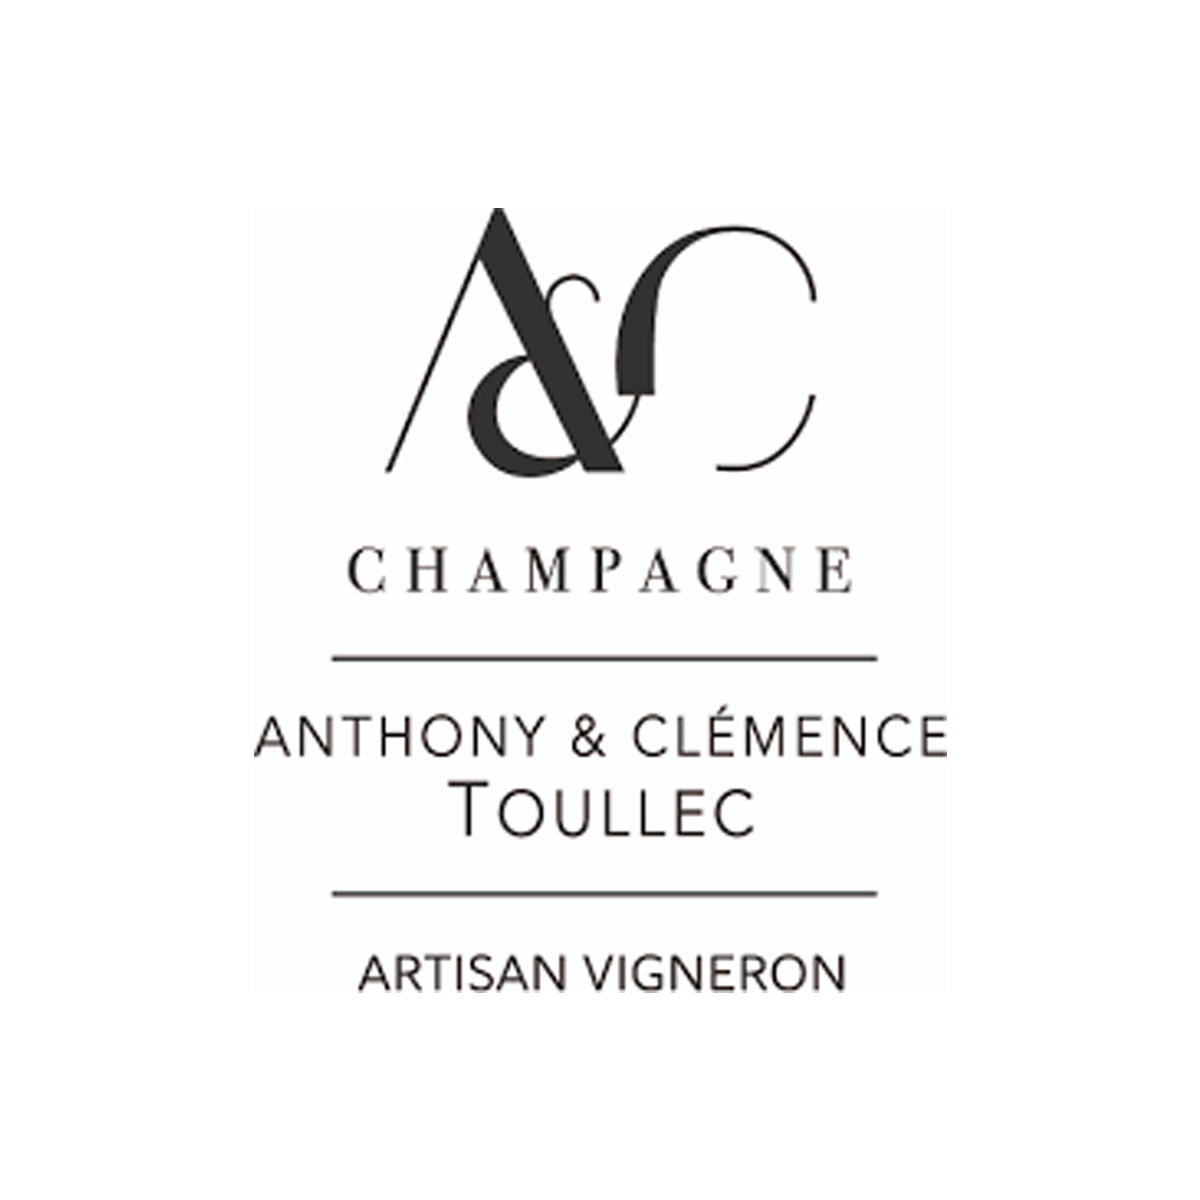 champagne-anthony-clemence-toullec-vigneron